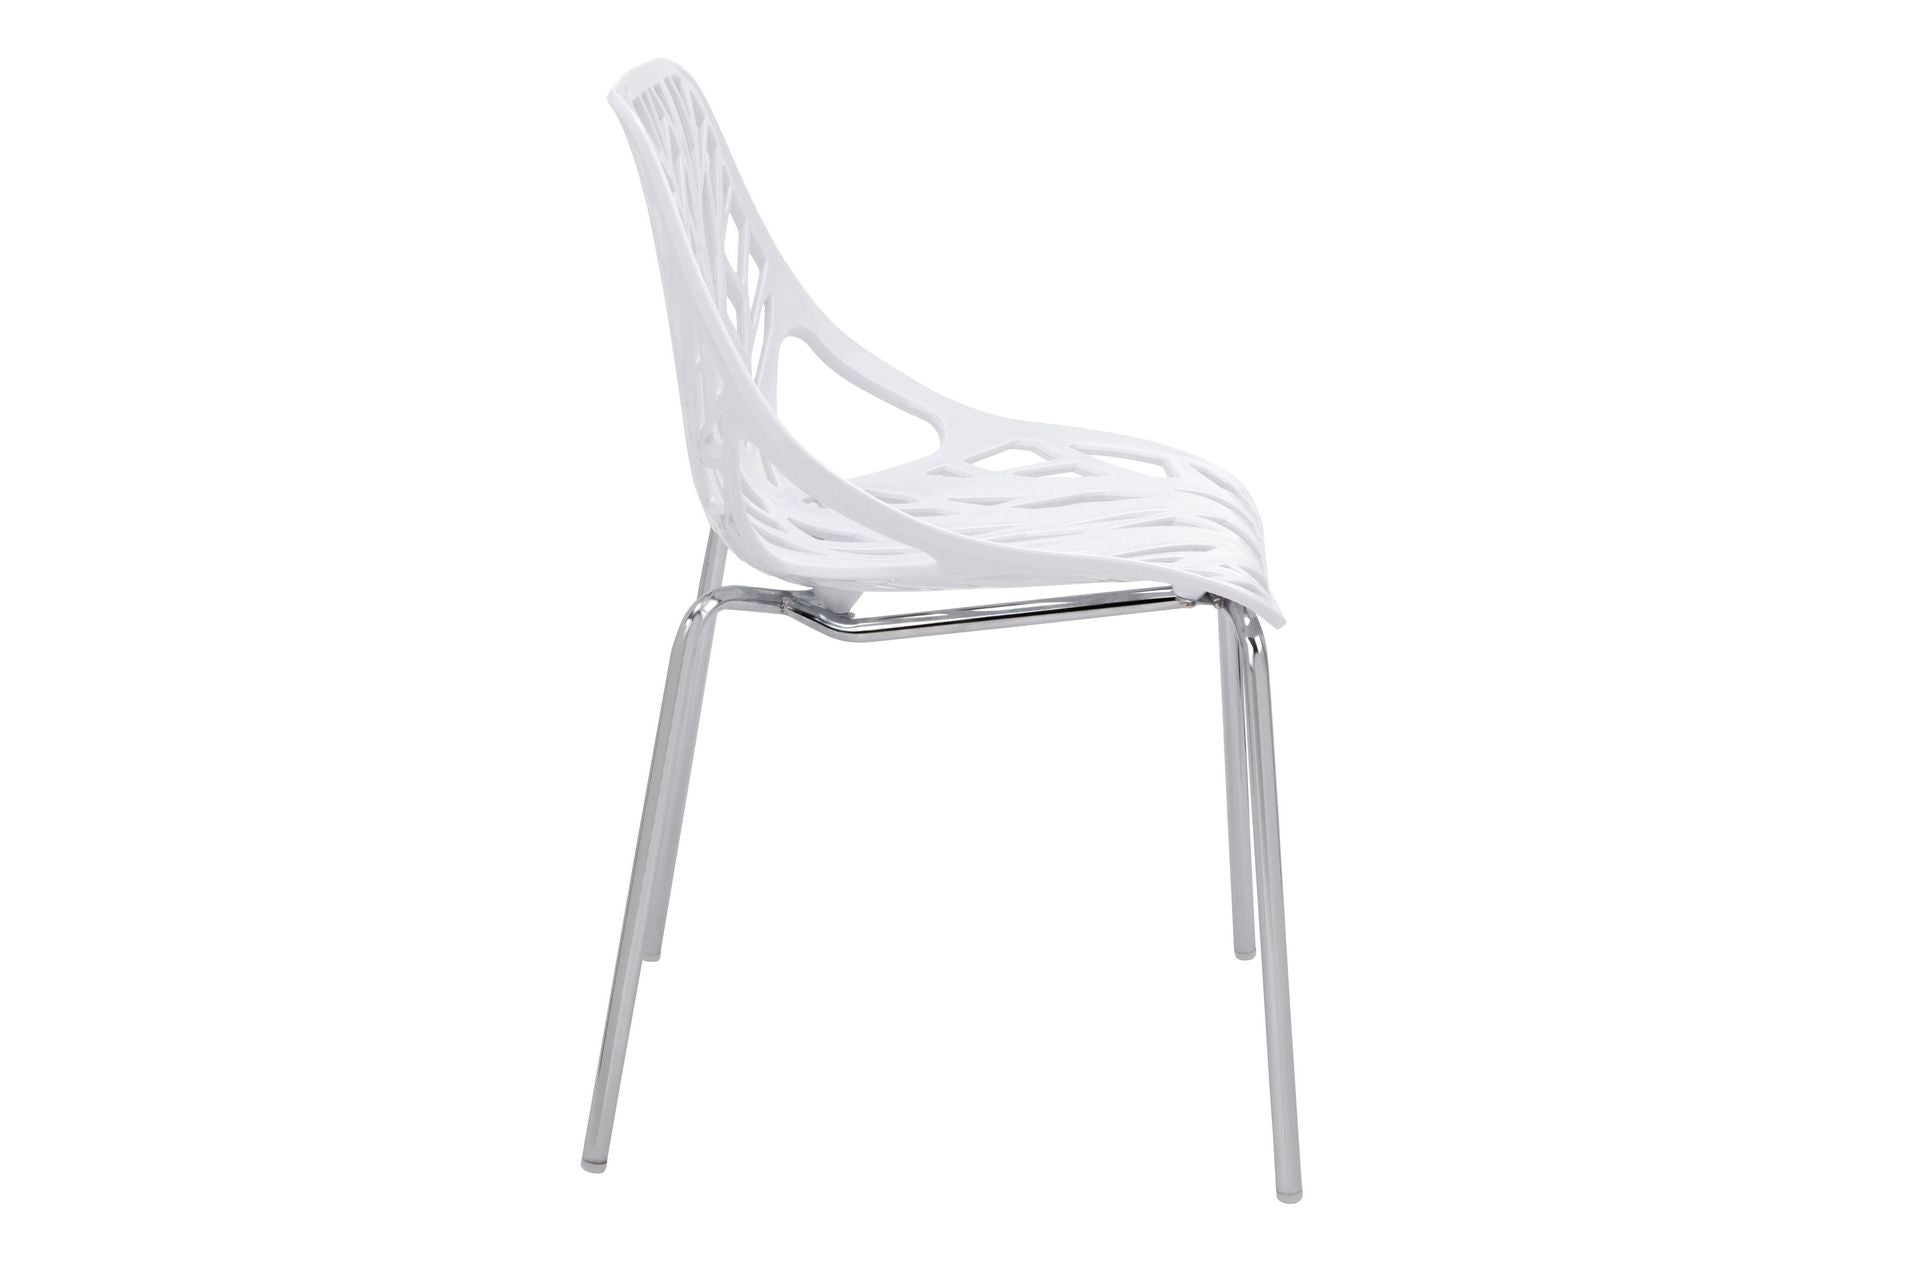 ZNTS White Plastic Chair With Metal Legs, 4 pc / Set B060103882